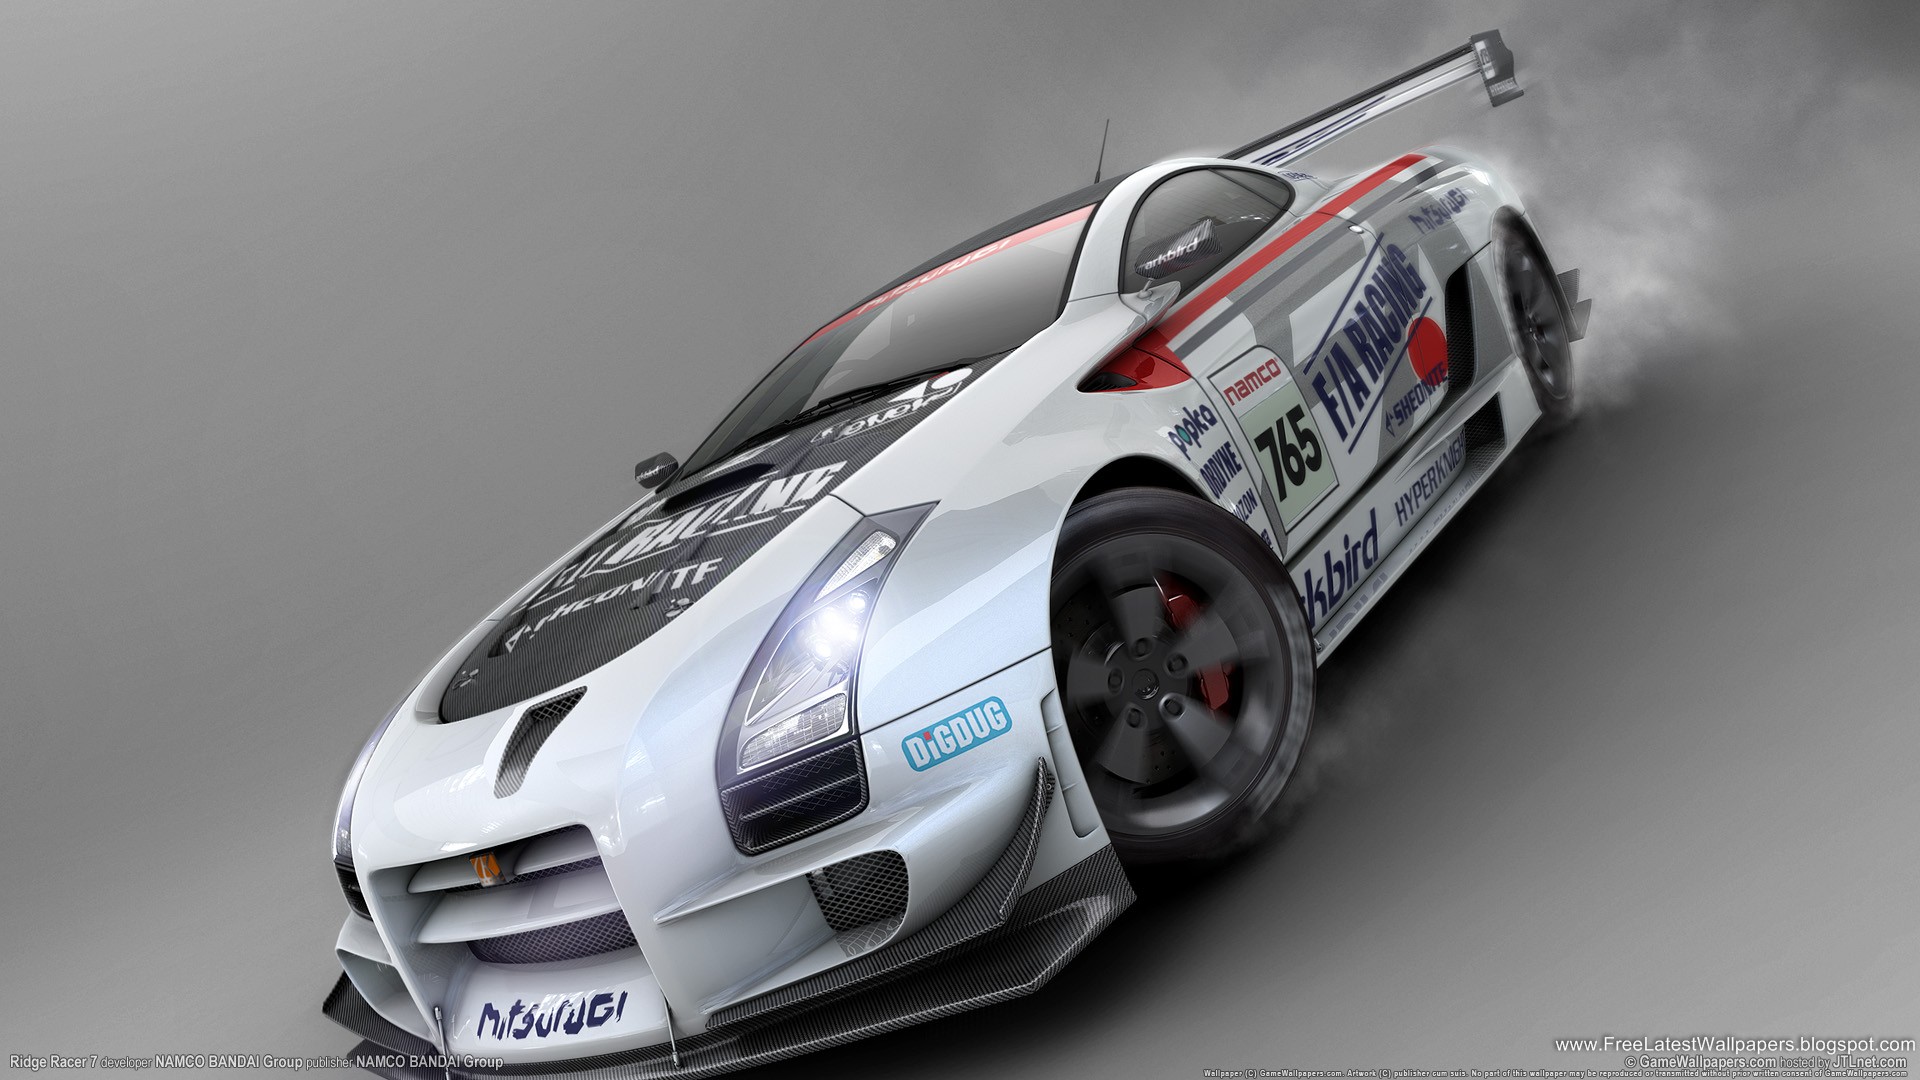 Ridge, racer, bestest, wallpapers, collection, games, slides (#154296)